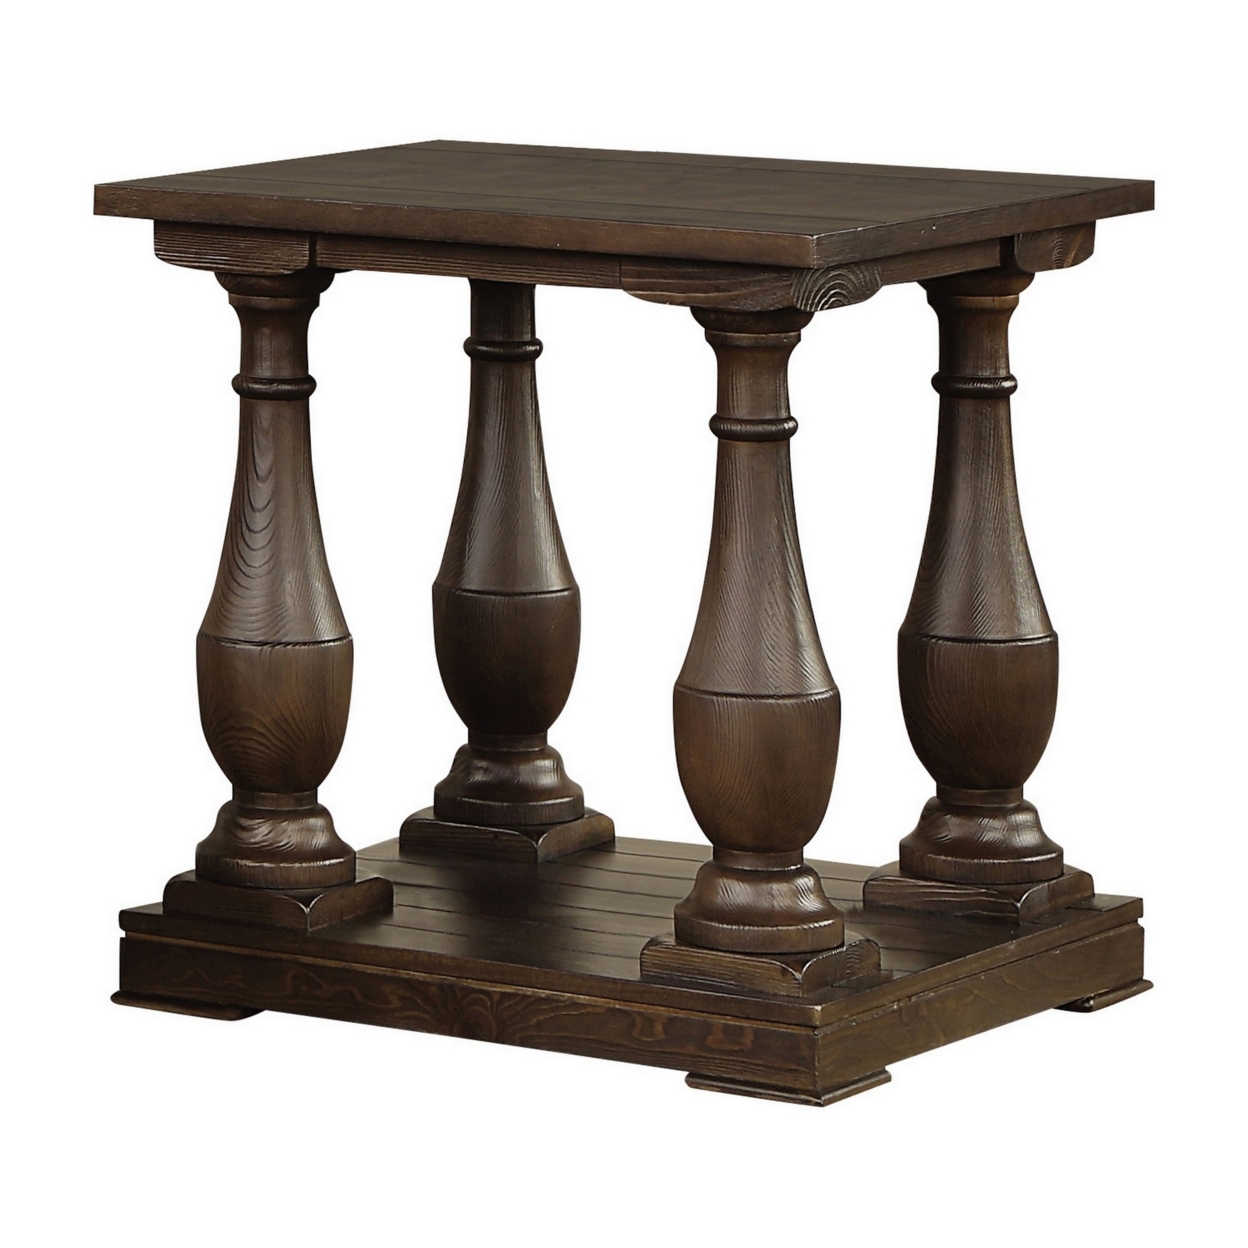 Aria 25 Inch Side Table, Rectangular Plank Top, Turned Column Base, Brown